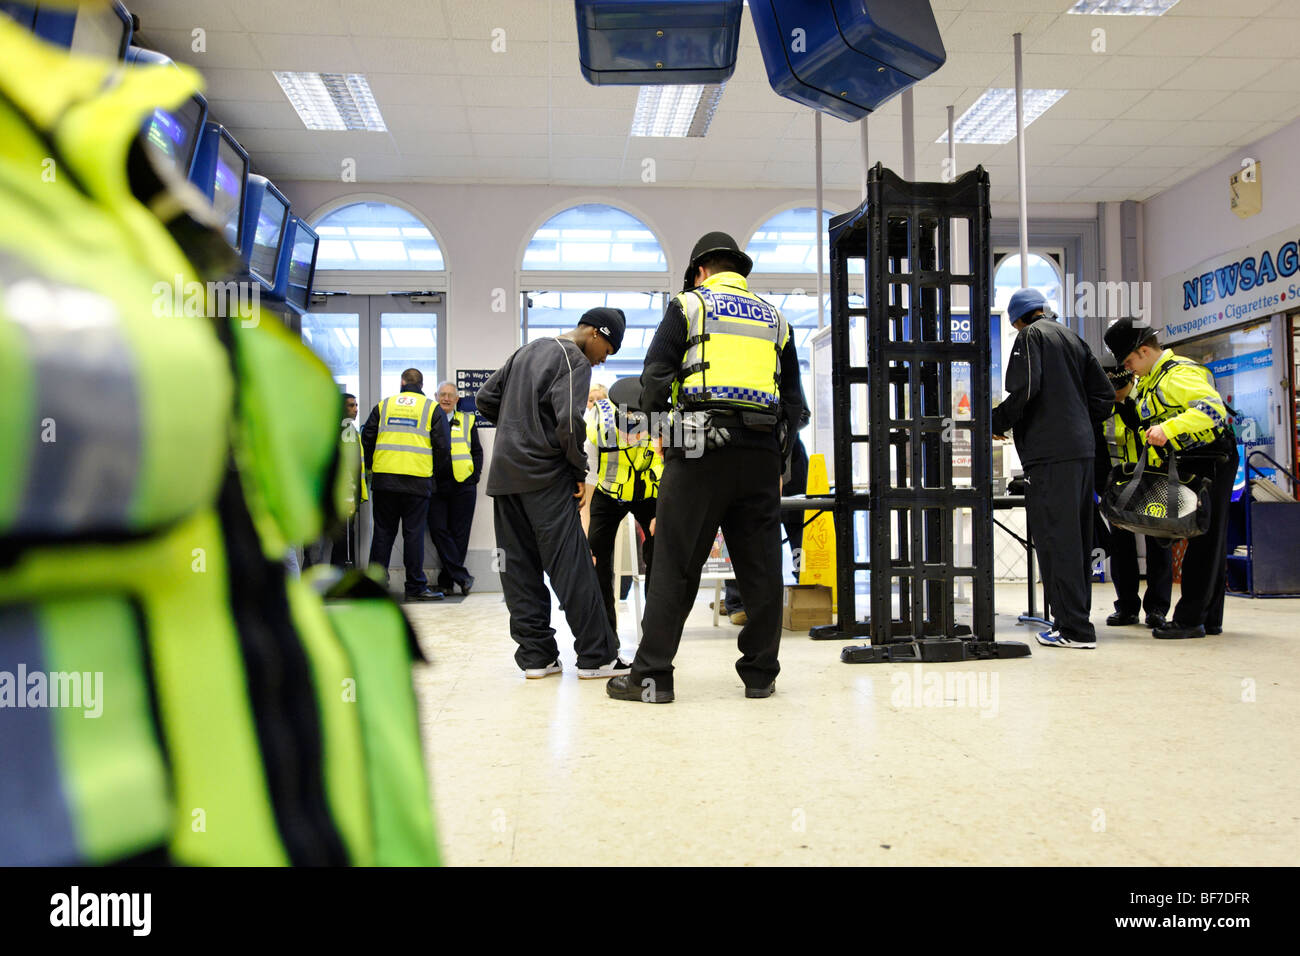 British Transport Police using the 'Knife Arch' detector during routine neighborhood policing at Lewisham train station. London Stock Photo